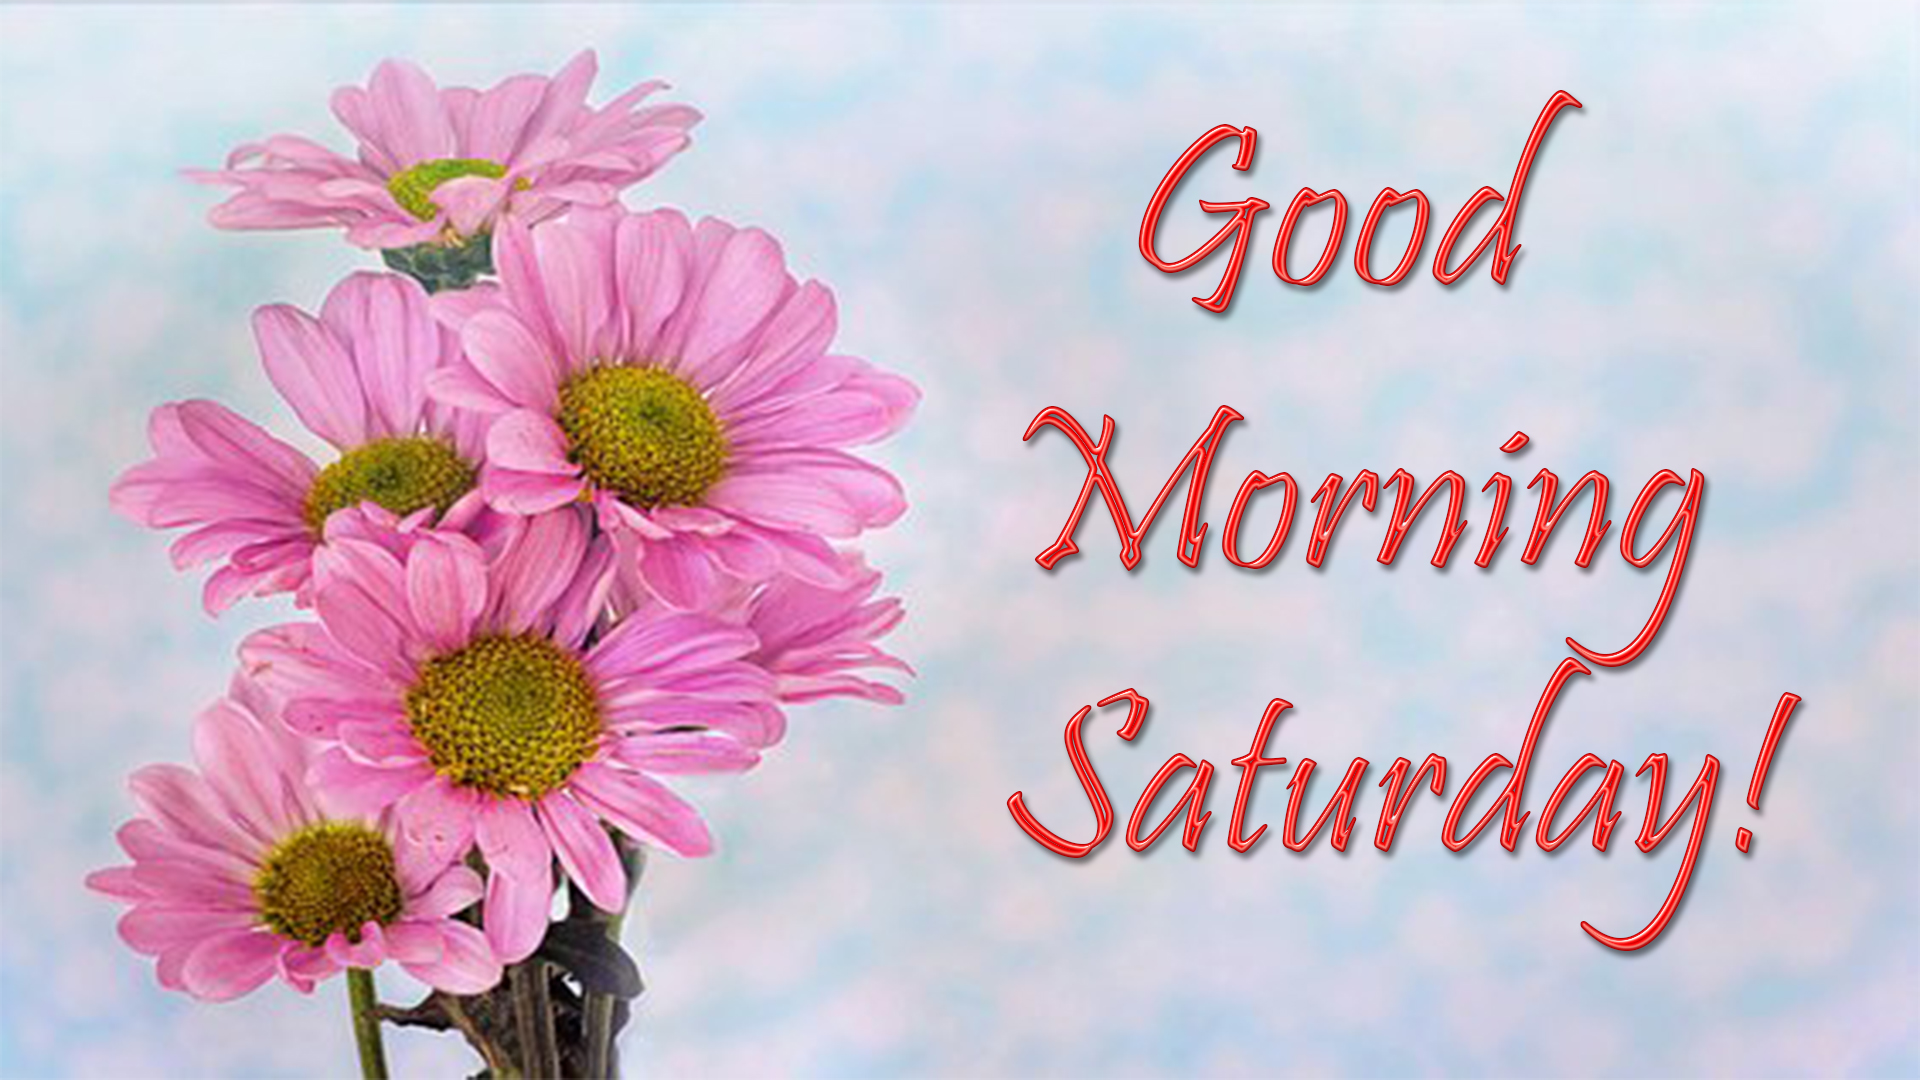 good morning saturday picture hd